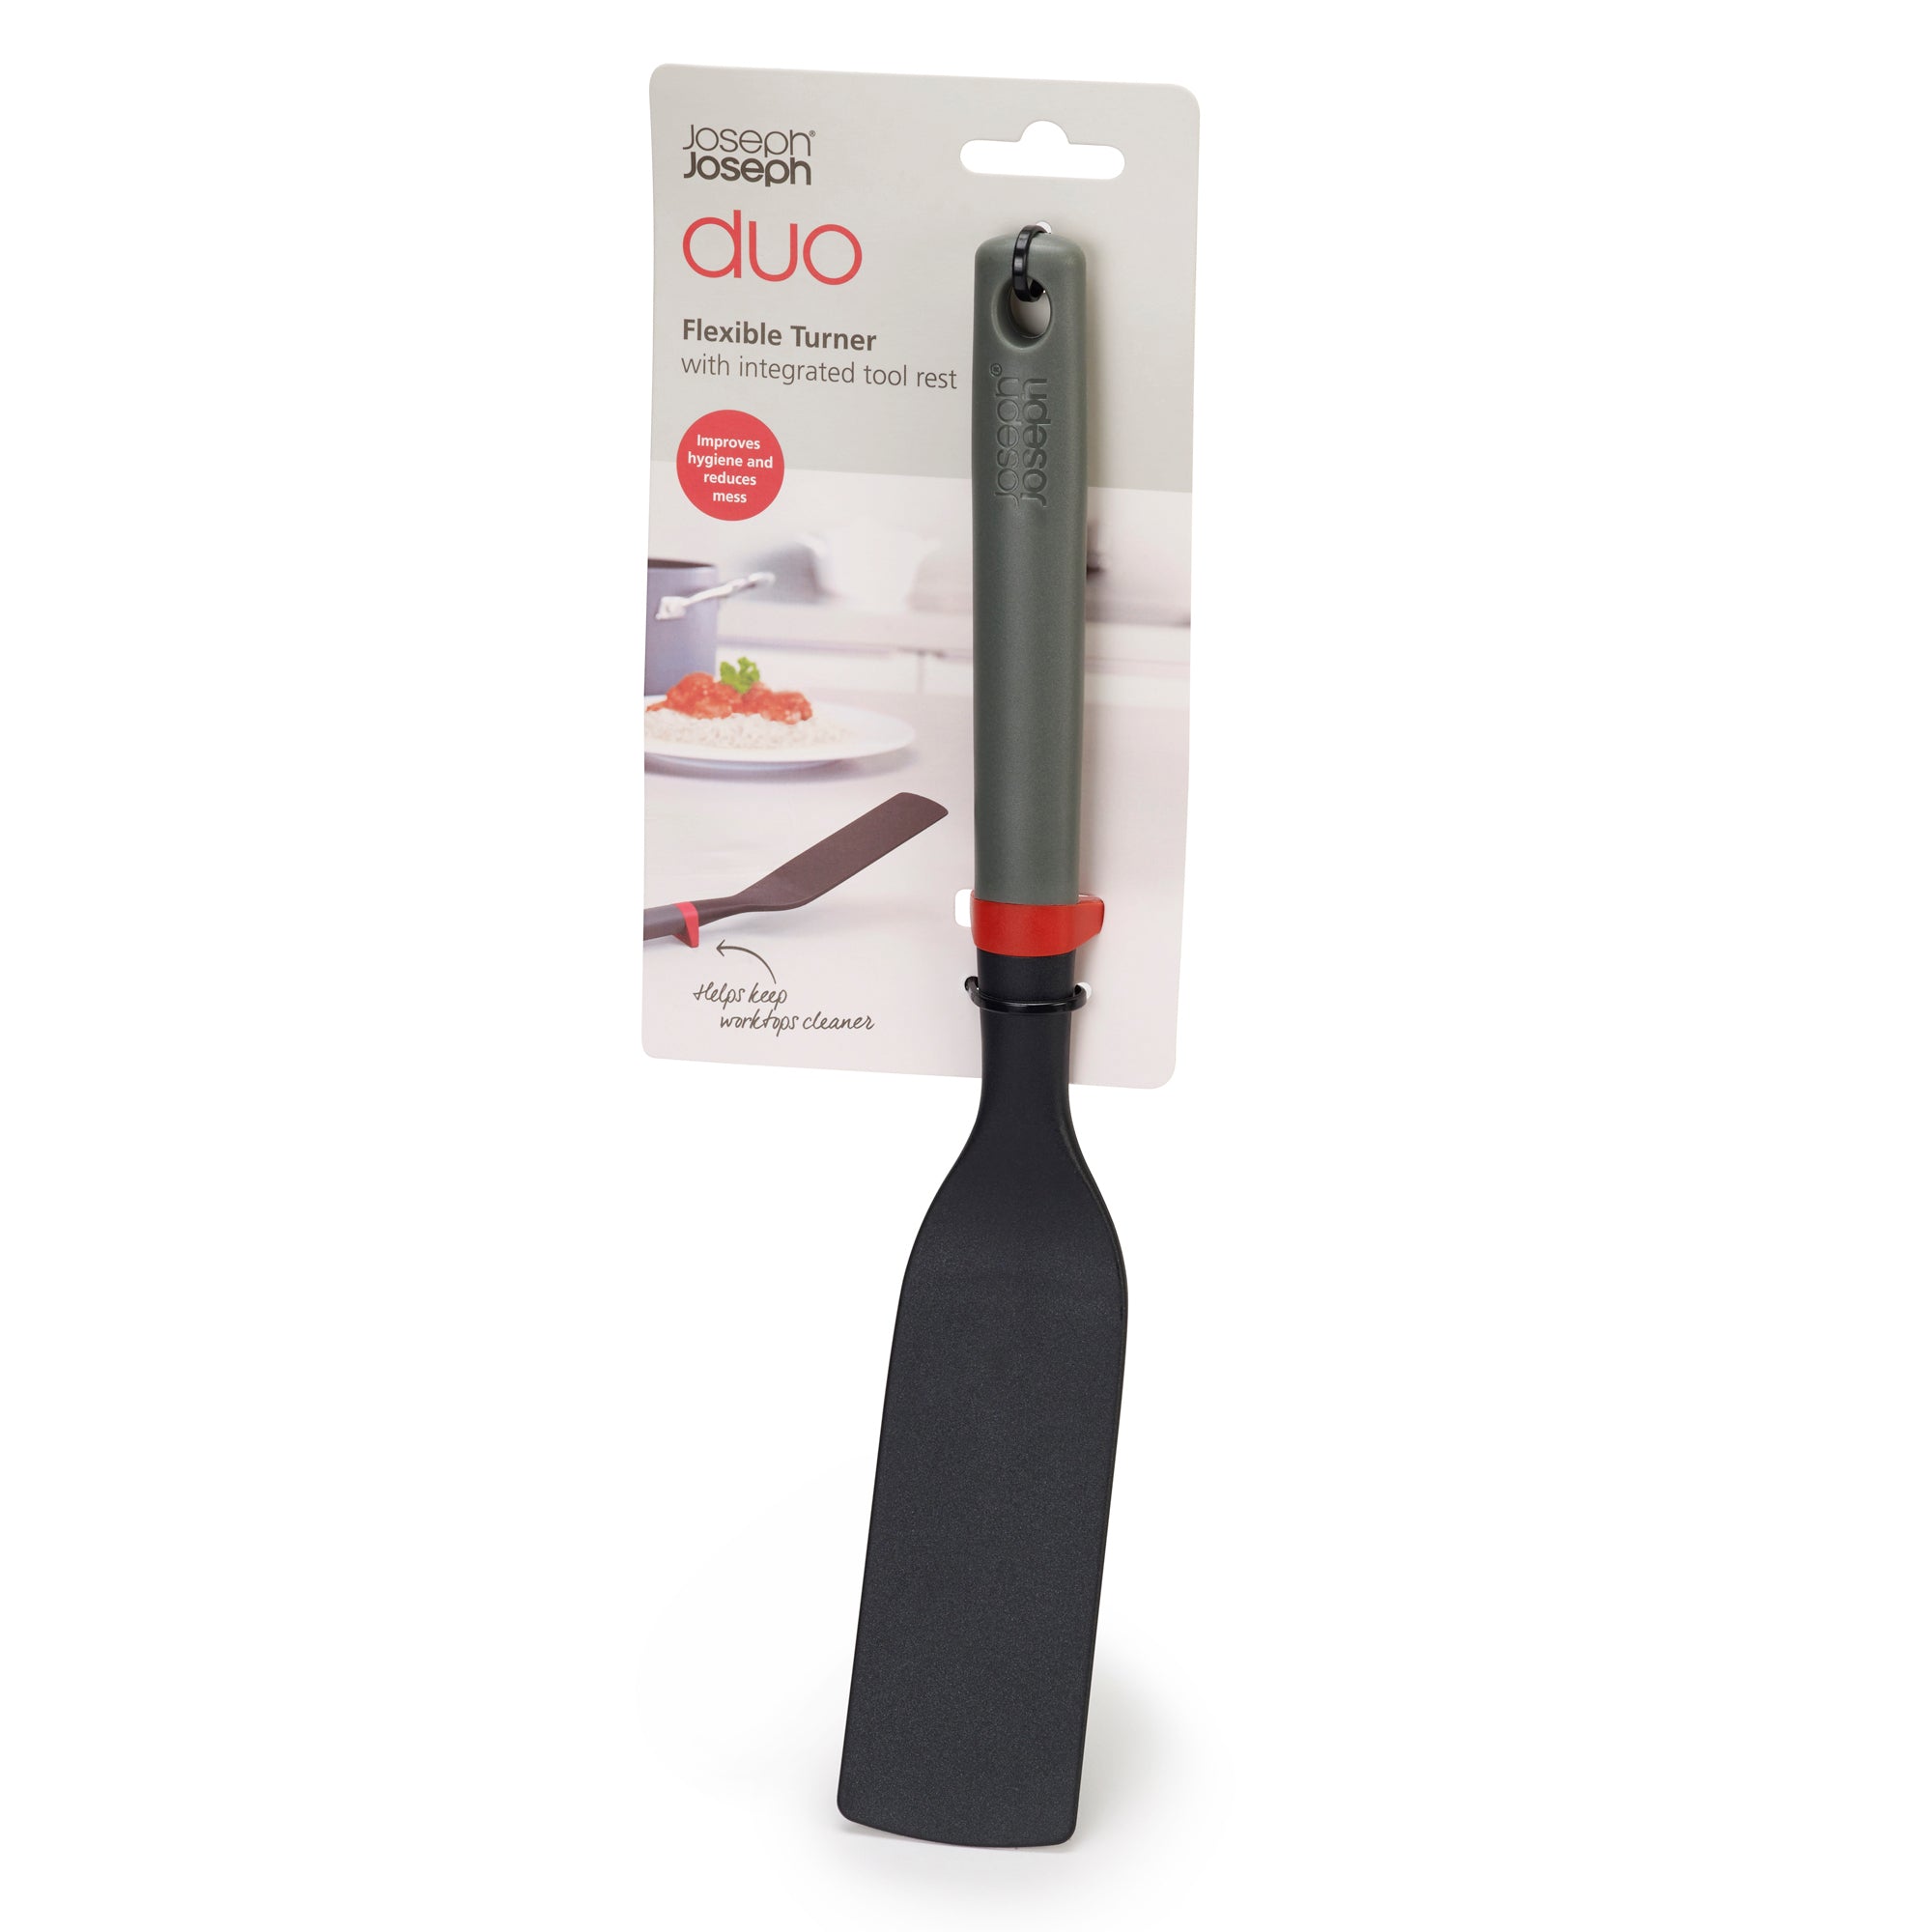 Duo Flexible Turner with Tool Rest - Grey/Red